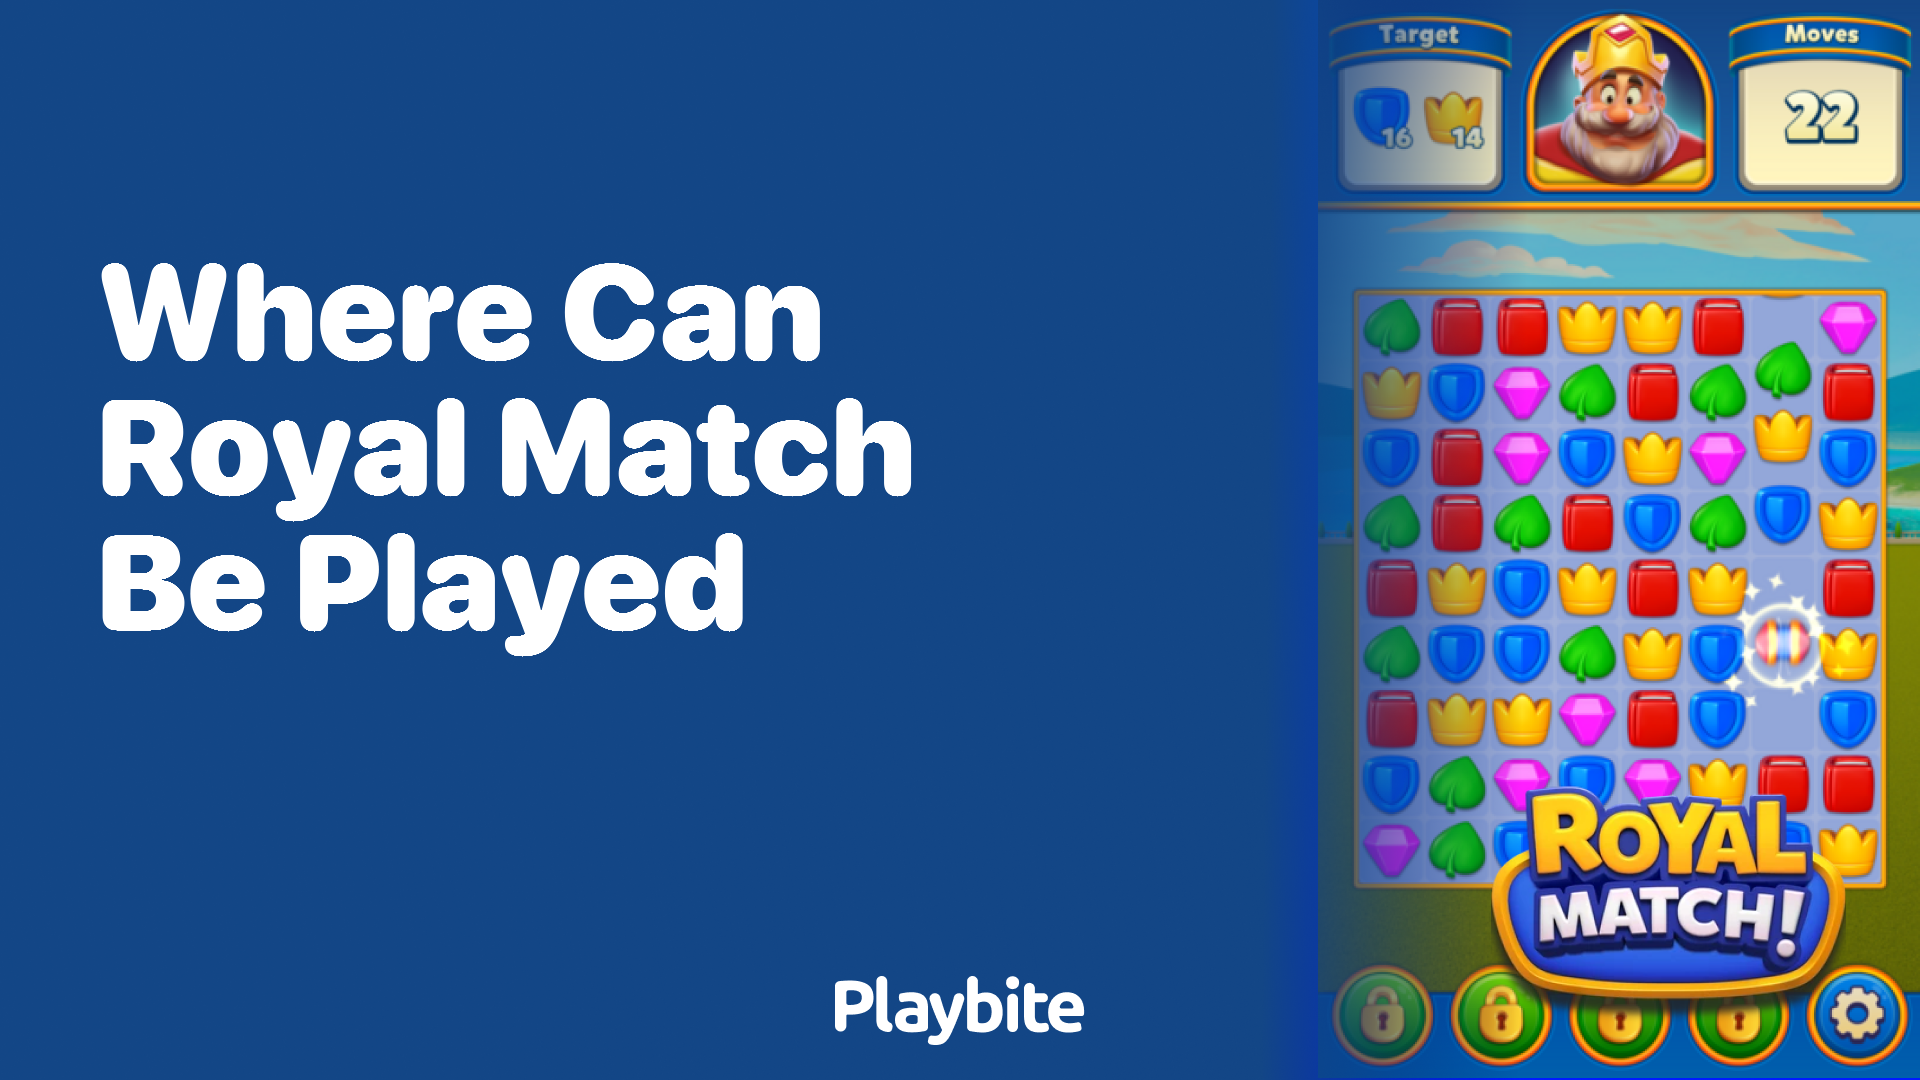 Where Can Royal Match Be Played?